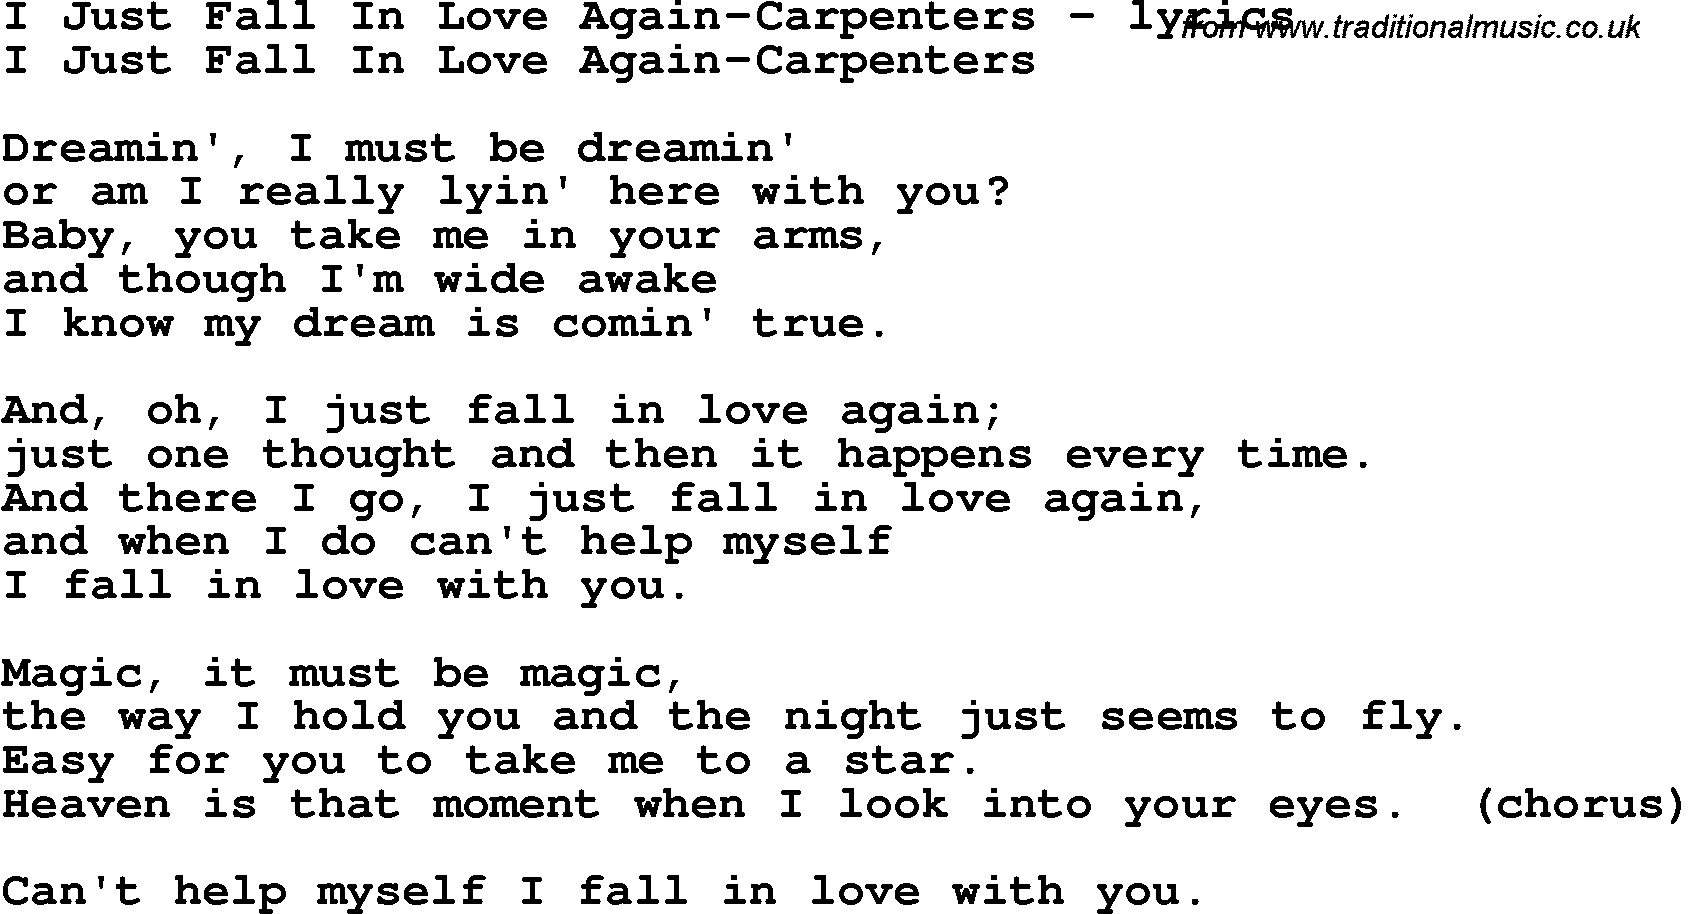 Love Song Lyrics For I Just Fall In Love Again Carpenters The lyrics for fall in love again by aleph have been translated into 2 languages. traditional music library